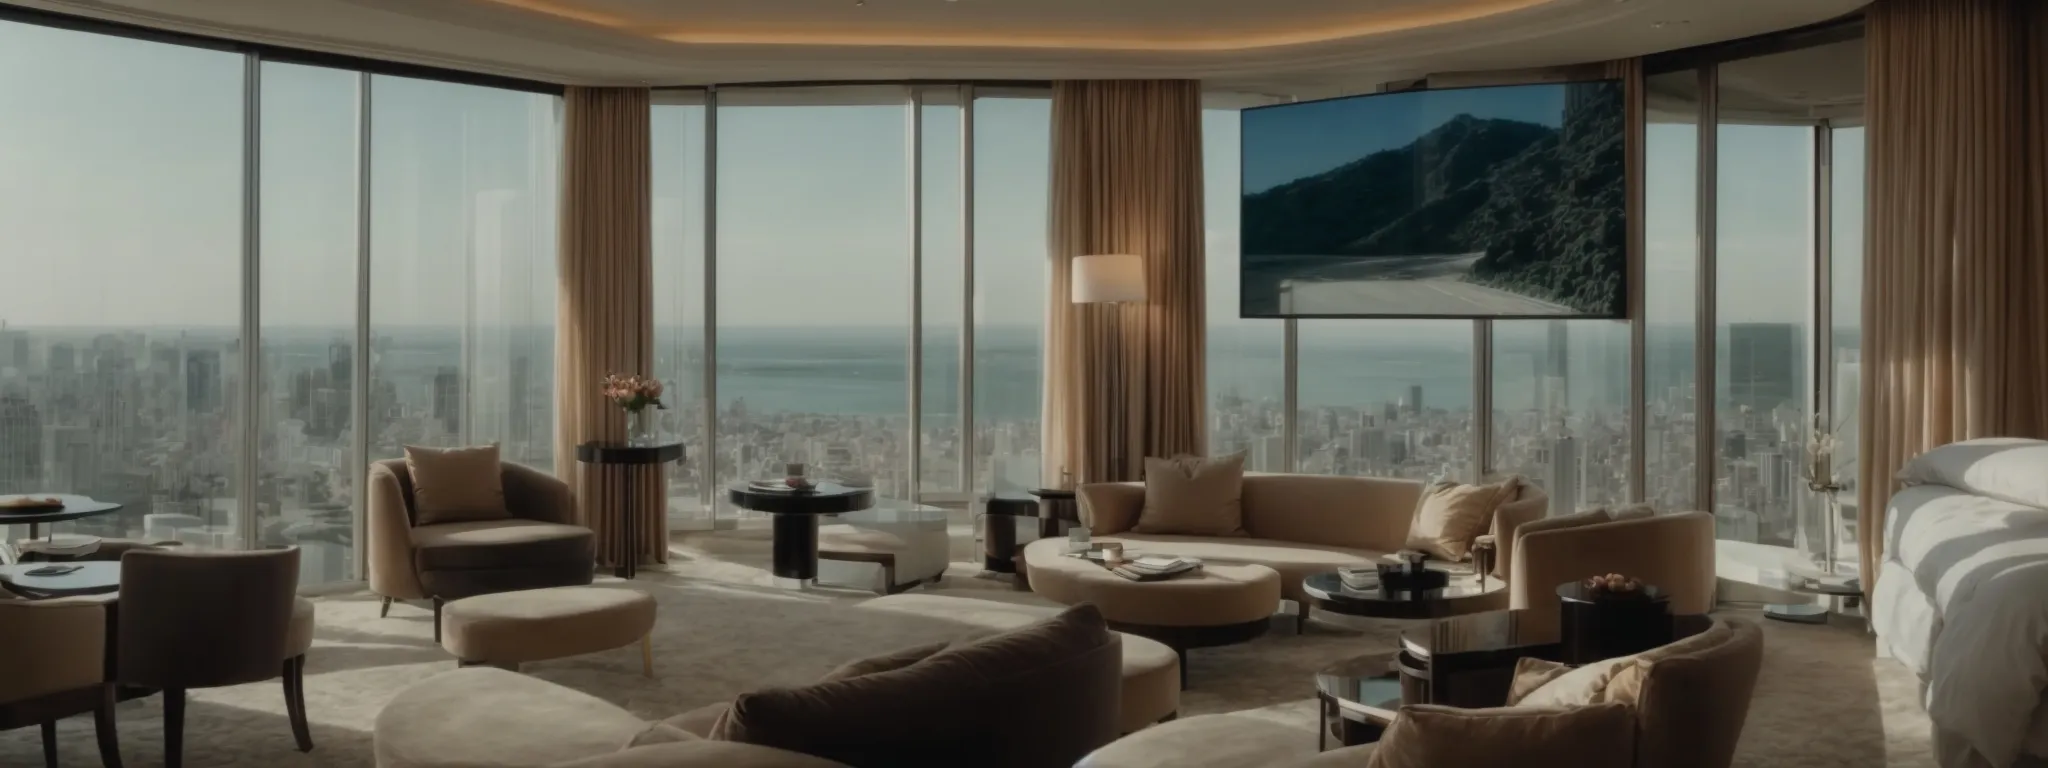 a luxurious hotel room with panoramic views showcased in an engaging video tour on a screen.